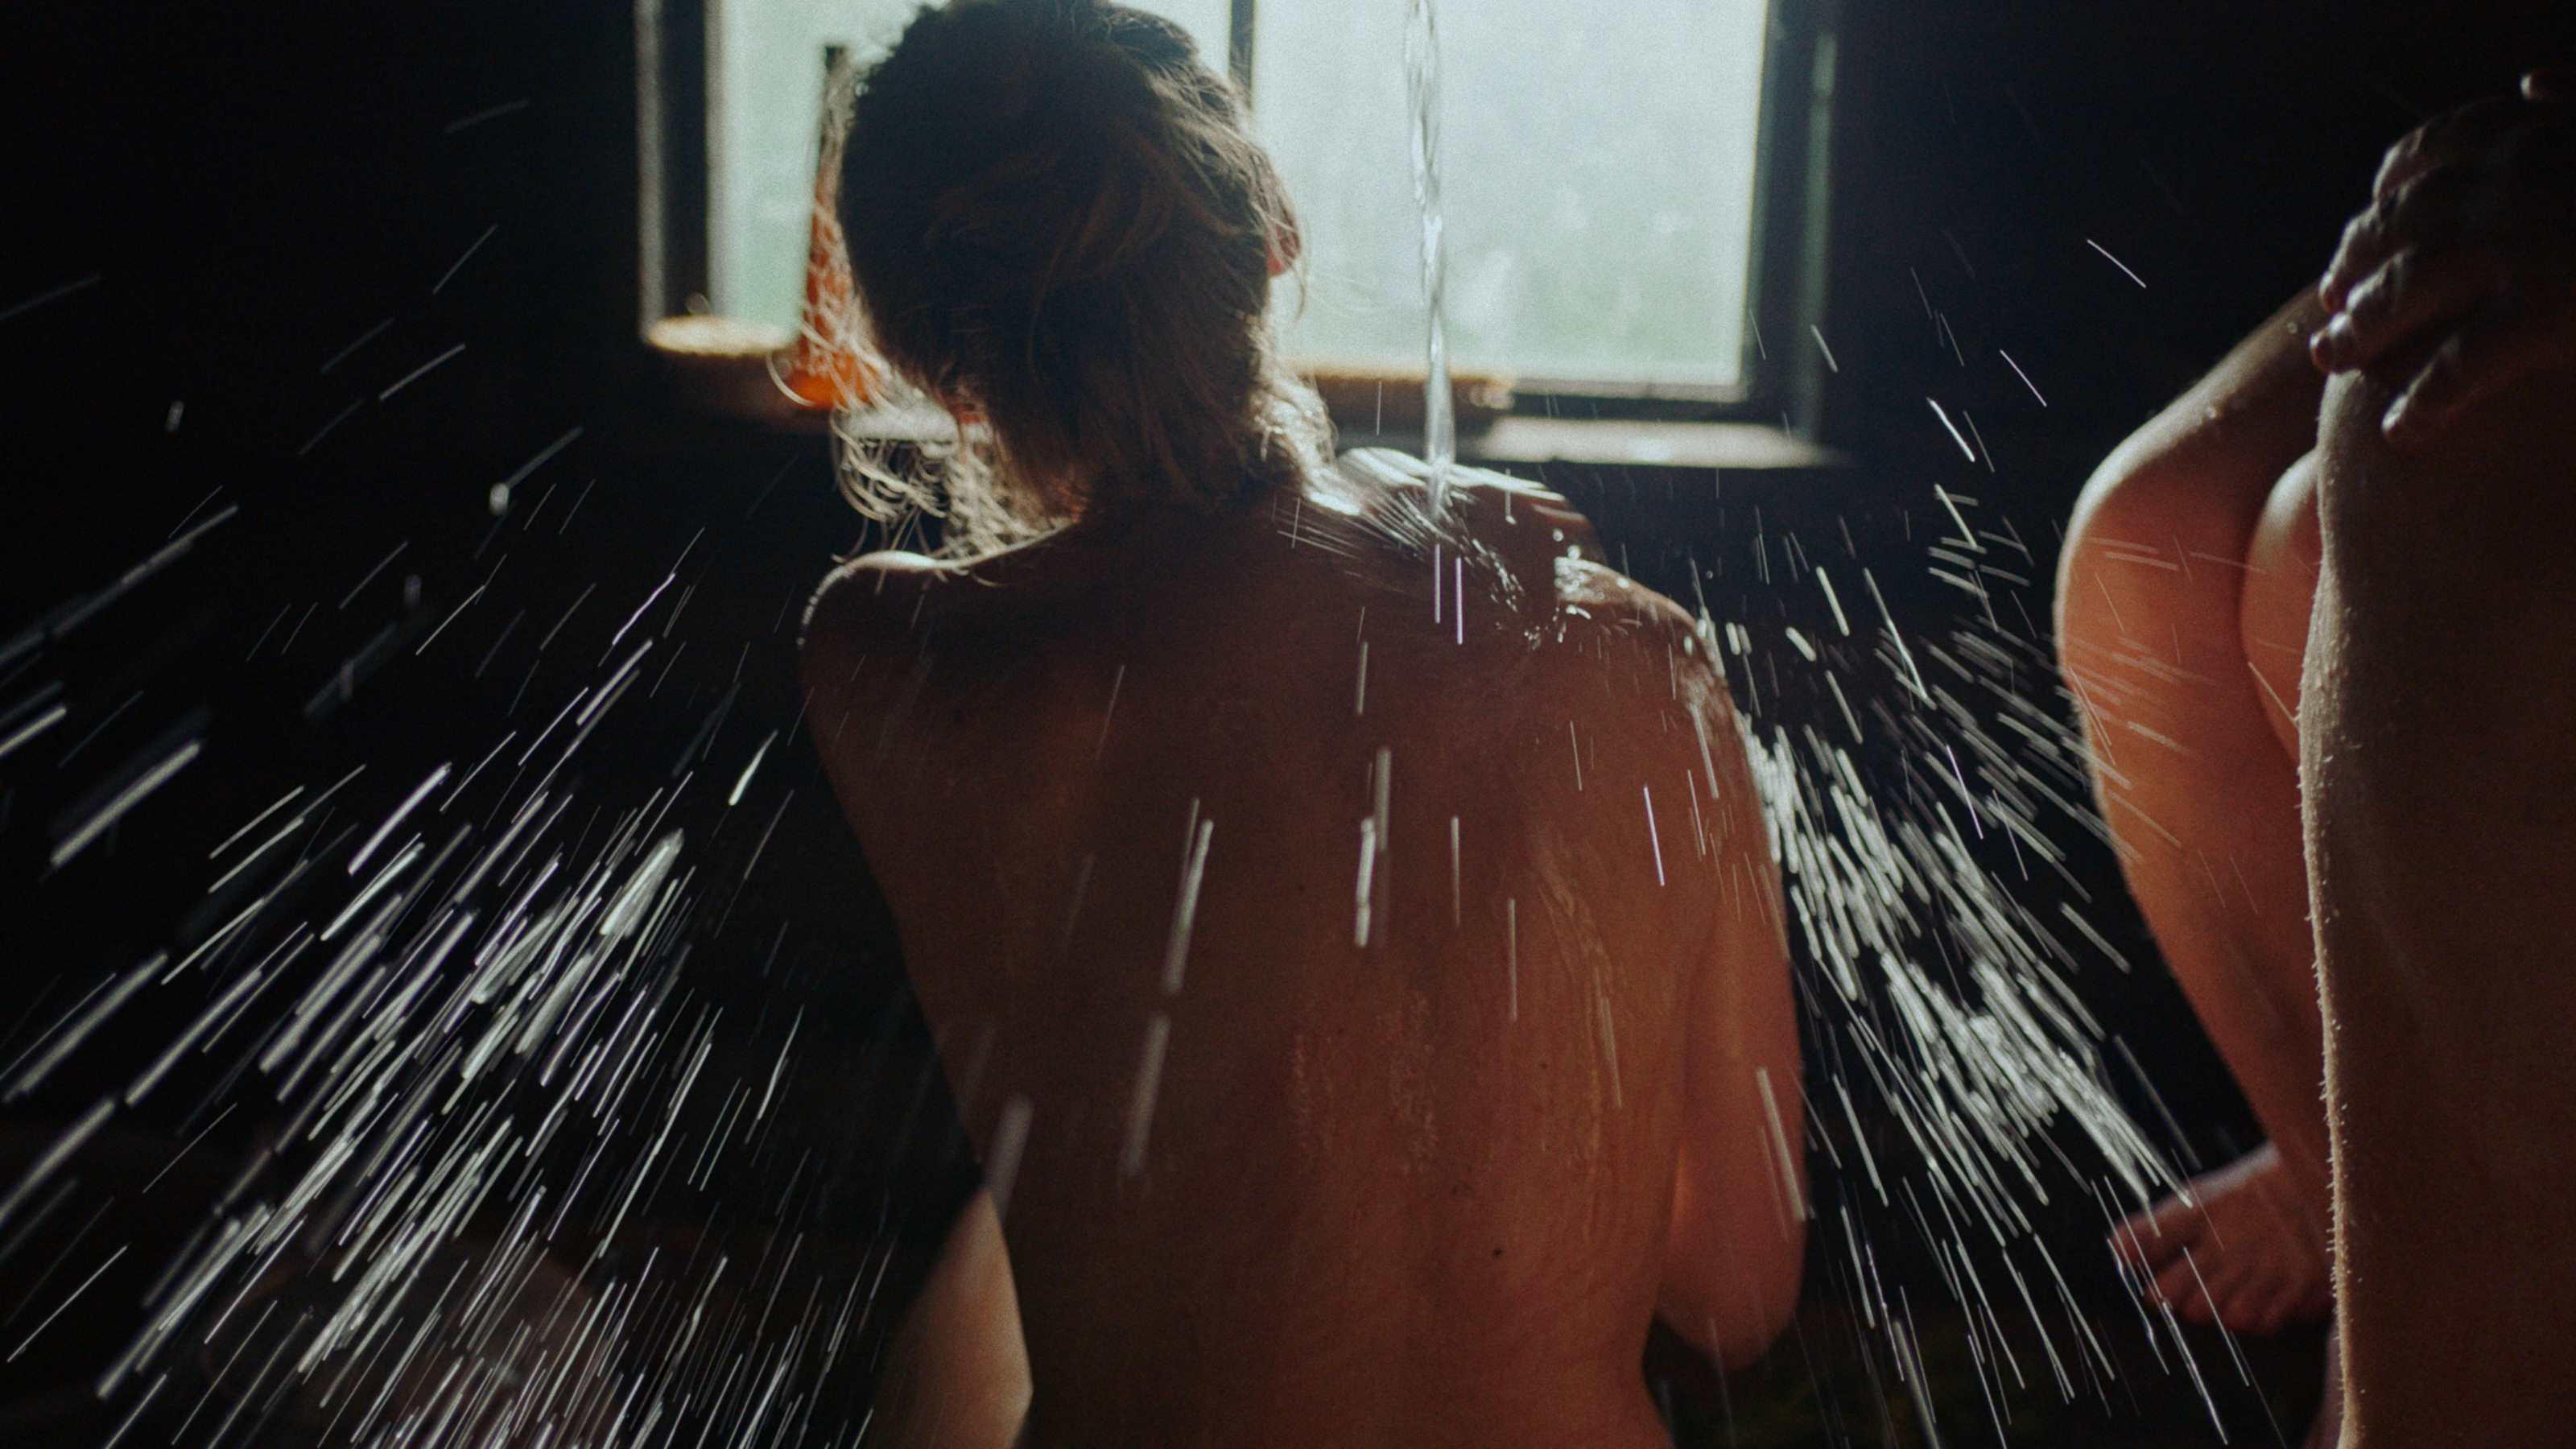 A women in a sauna splashes herself with water.